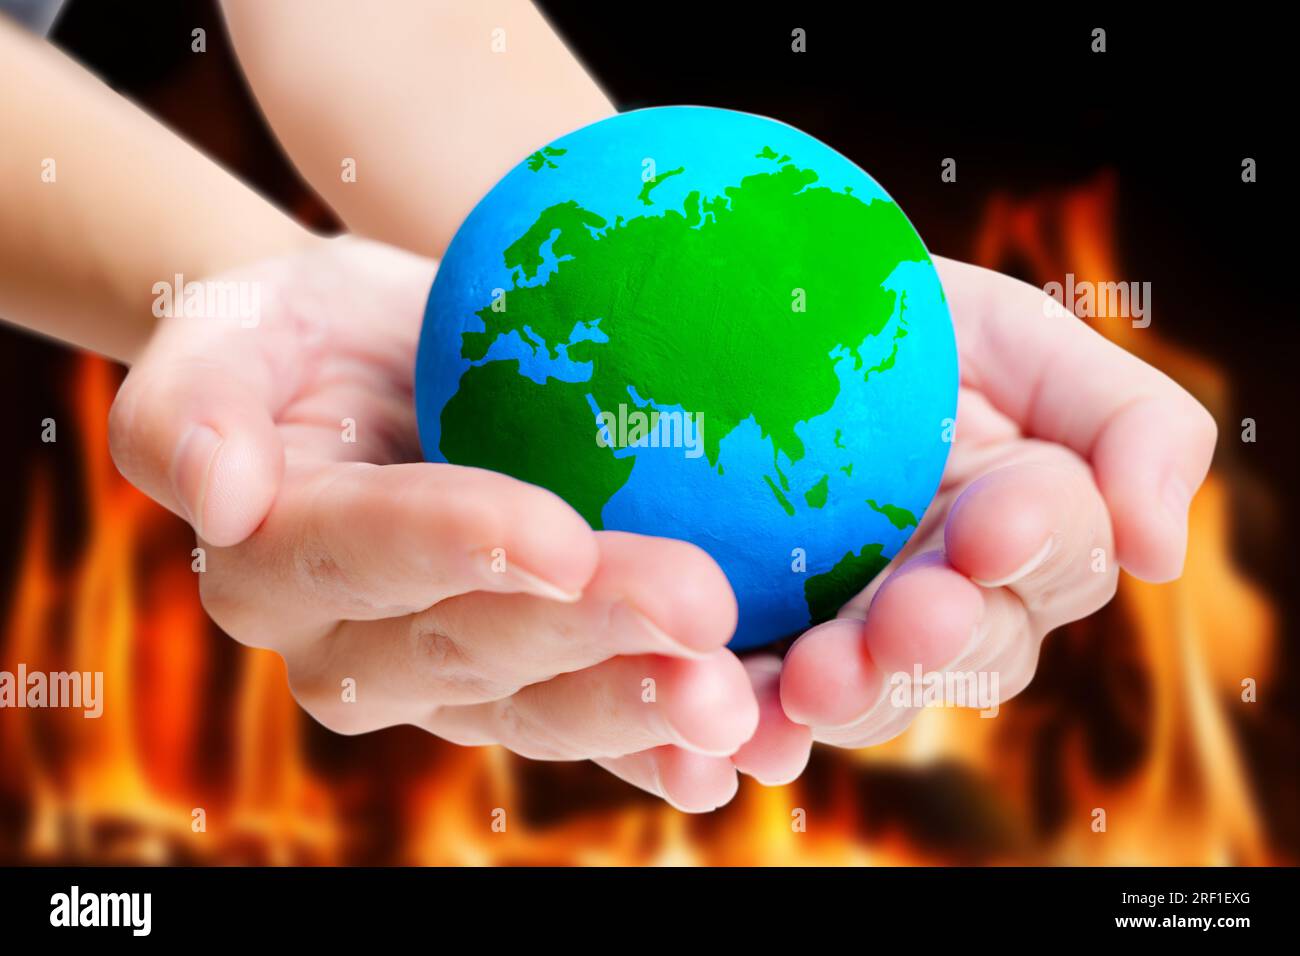 Blue and green model of the Earth held in hands against a backdrop of flames. Concept of environmental activism and the need for immediate action. Stock Photo